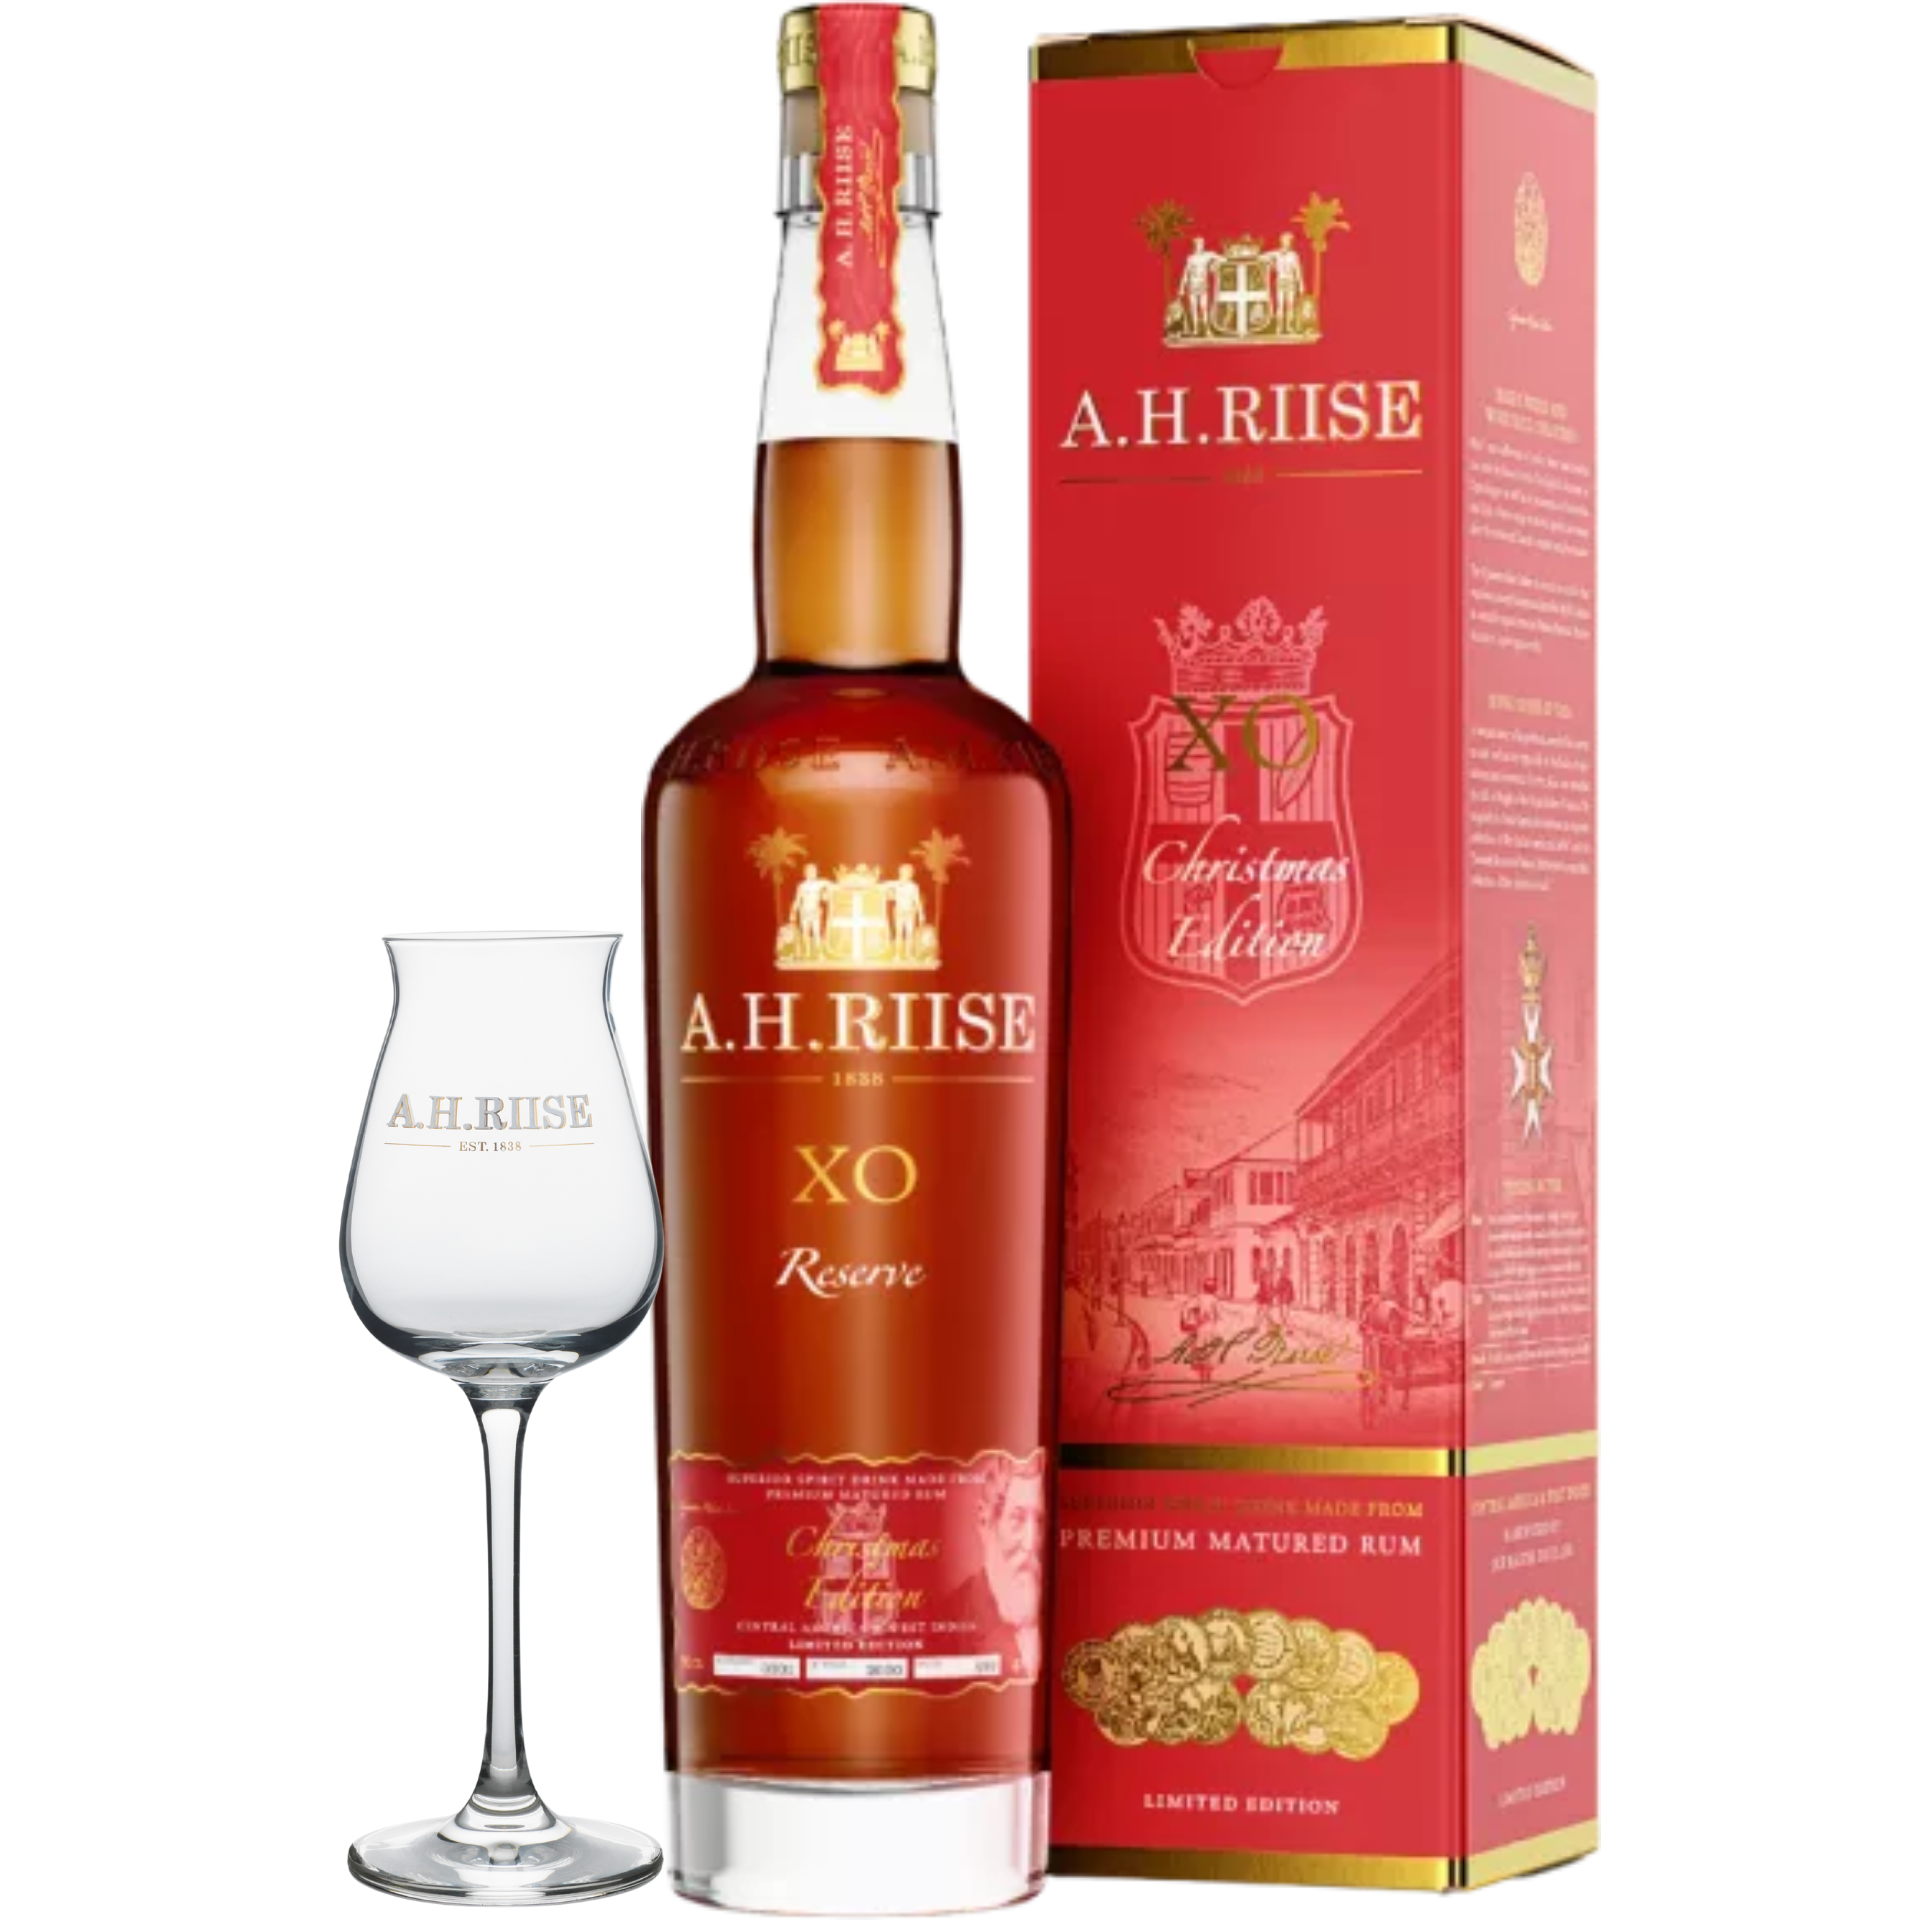 A.H. Riise XO Reserve Christmas Edition 40% 0,7l + A.H. Riise Glas